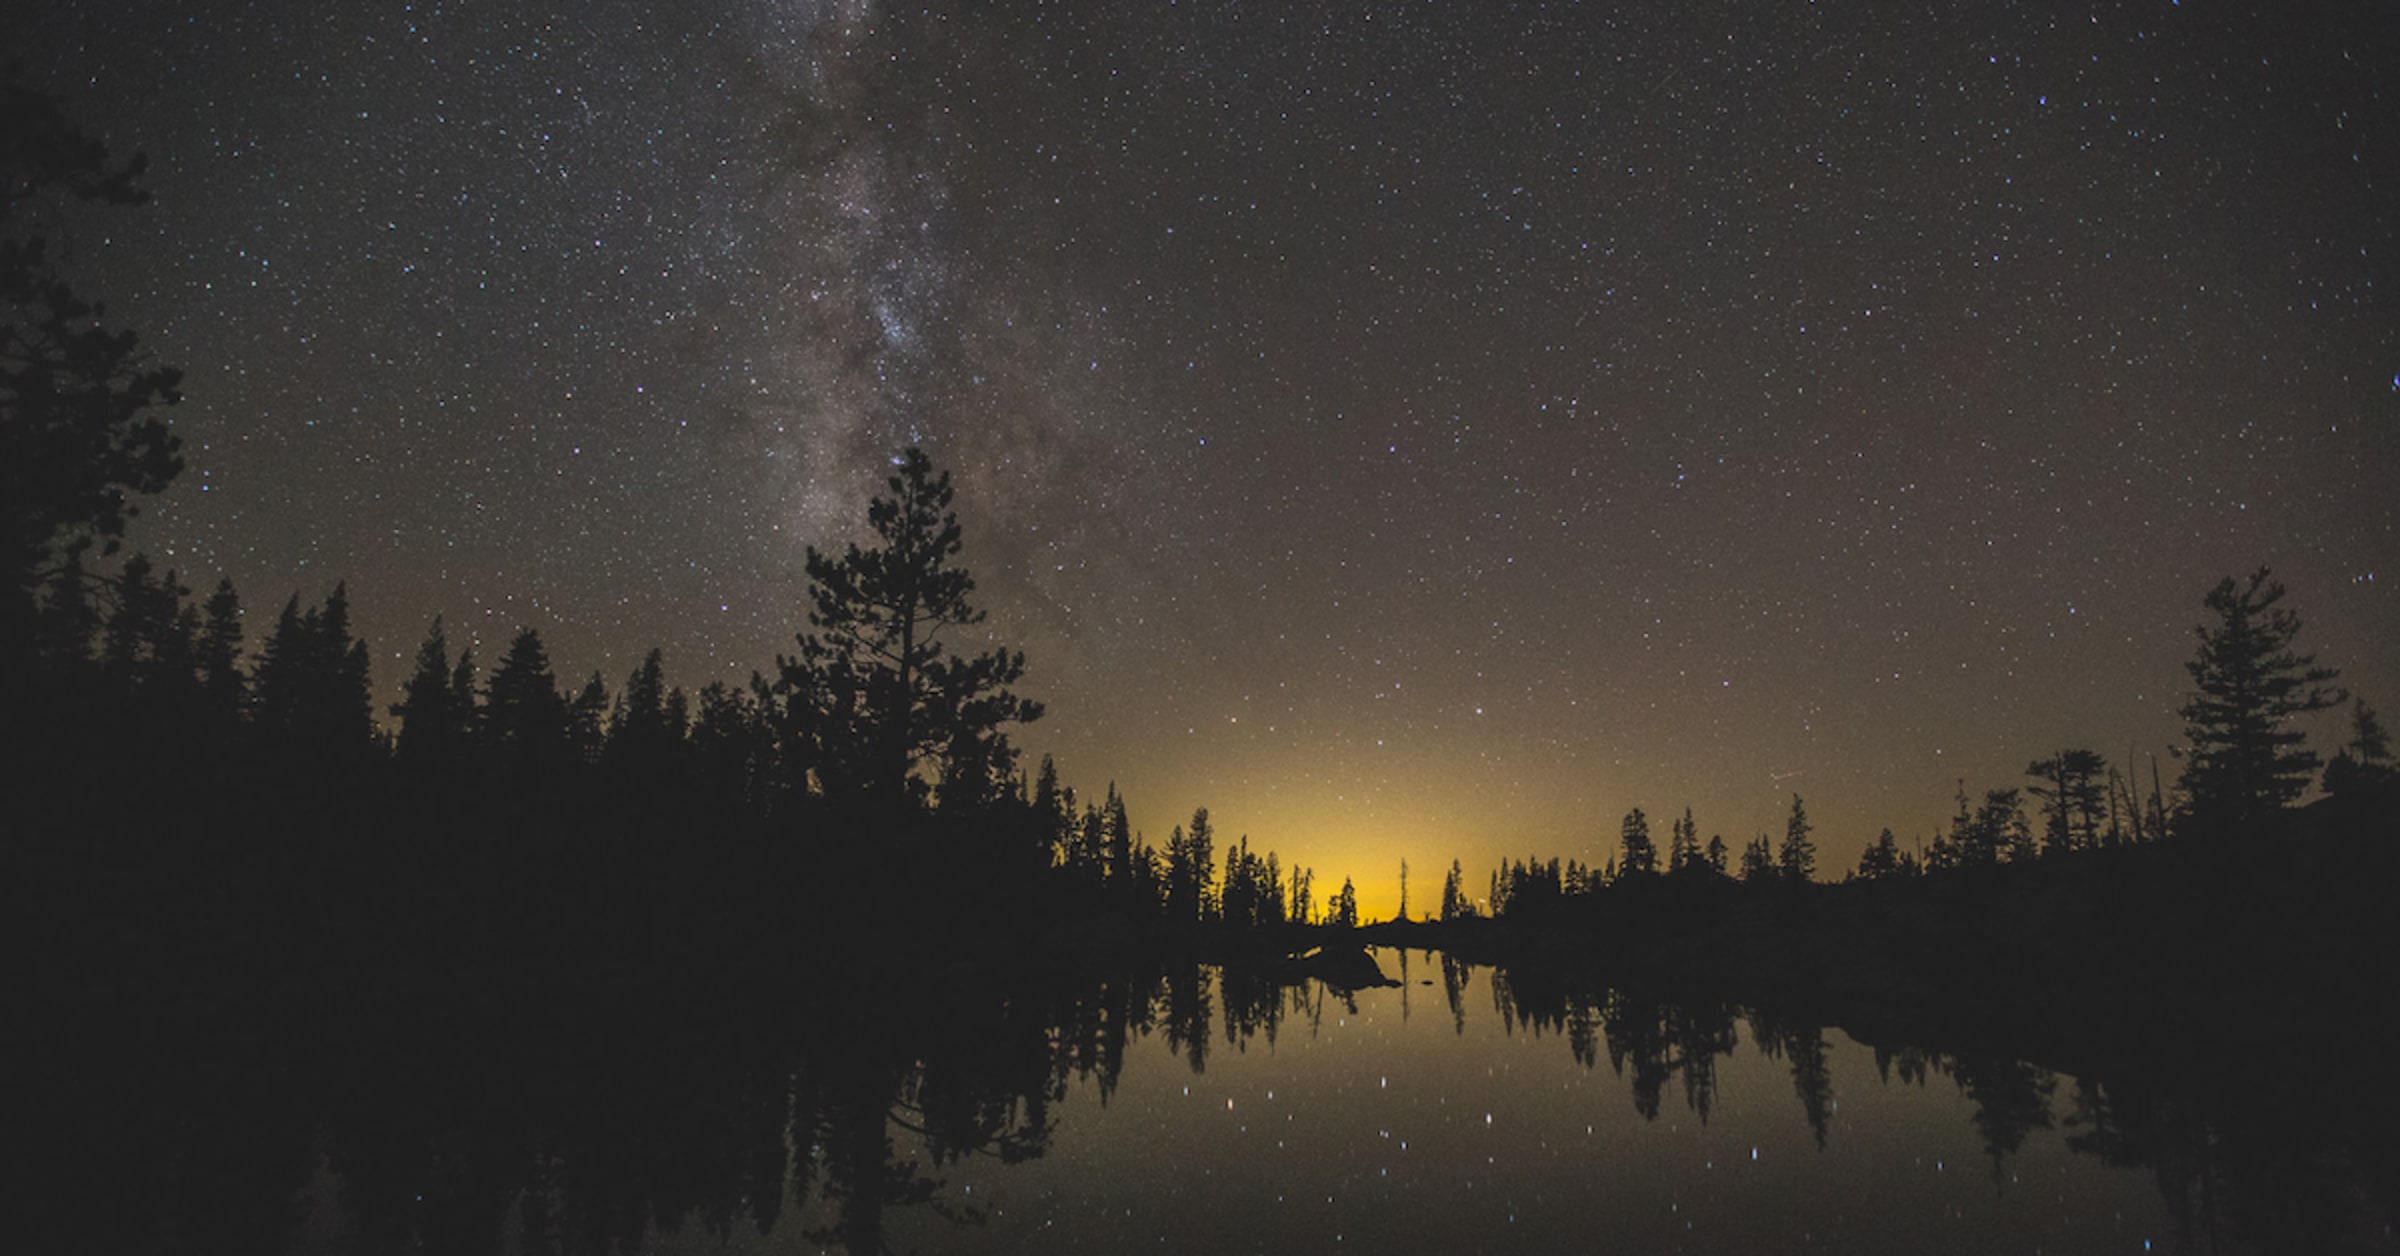 Long exposure photography for stargazing